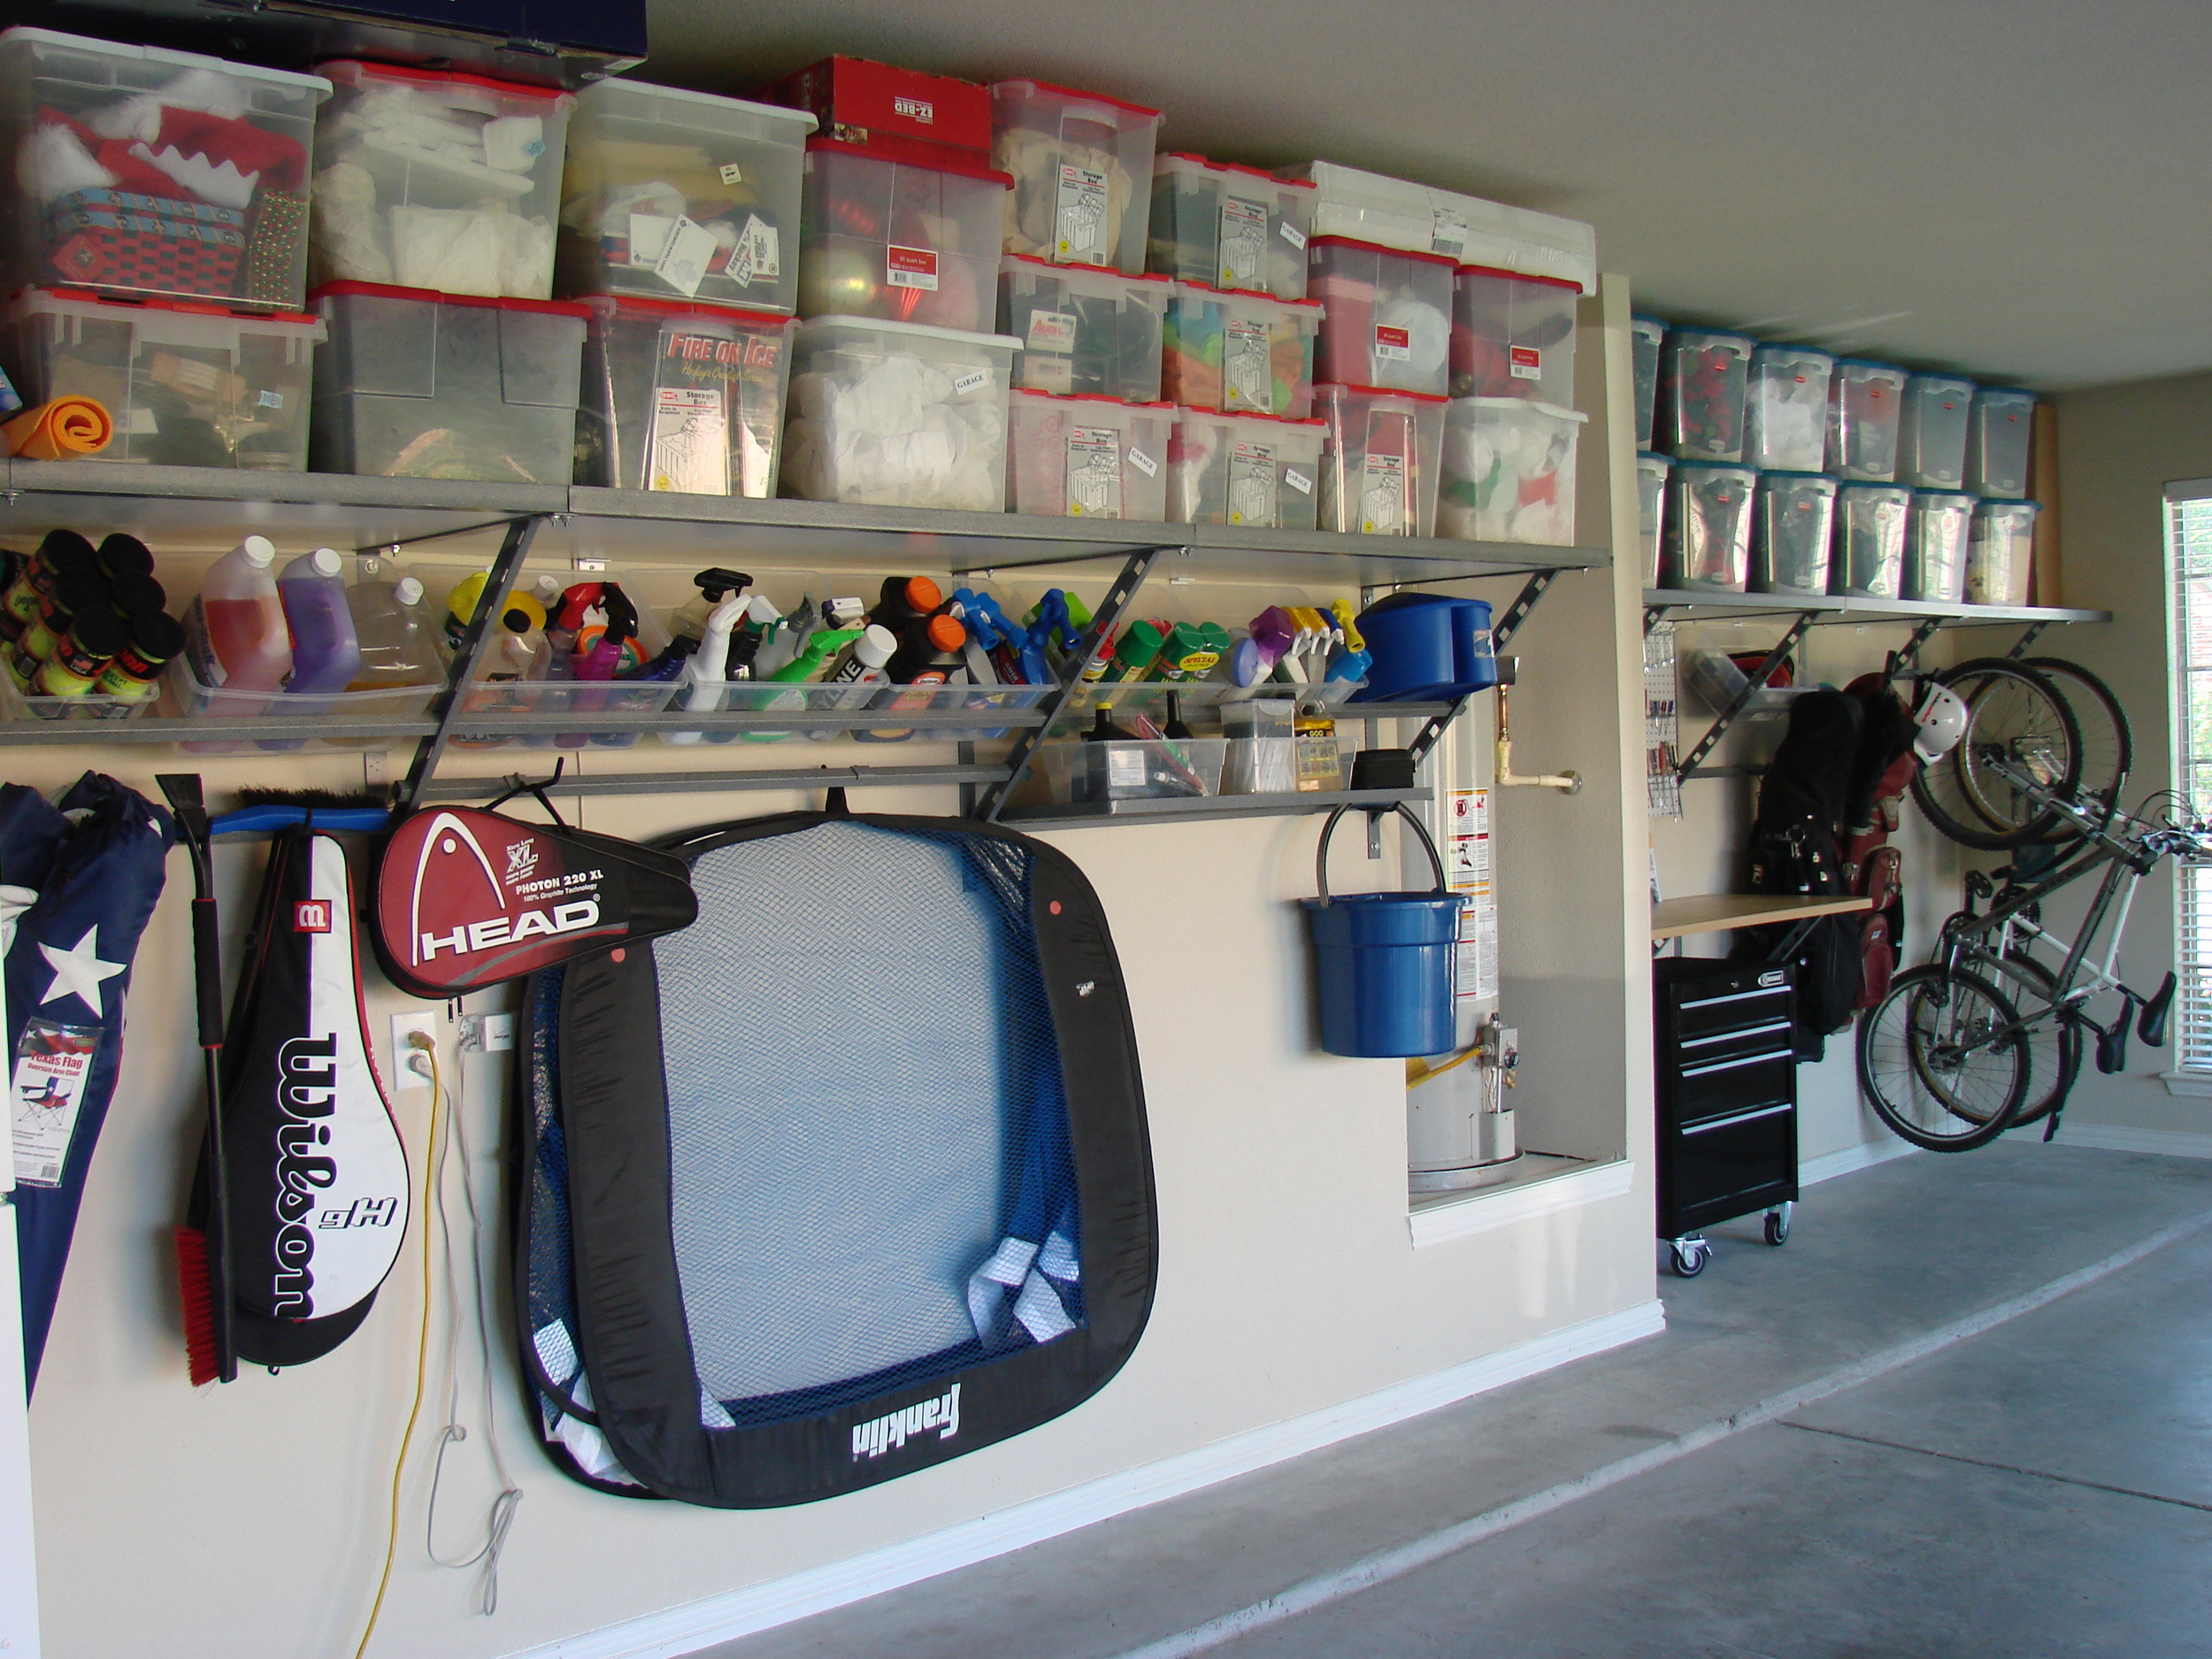 inspiration-storage-amazing-wall-mount-garage-organization-ideas-with-floating-rack-garage-storage-for-space-saving-garage-ideas-garage-ideas-storage-fixtures-layouts-and-remodels.JPG